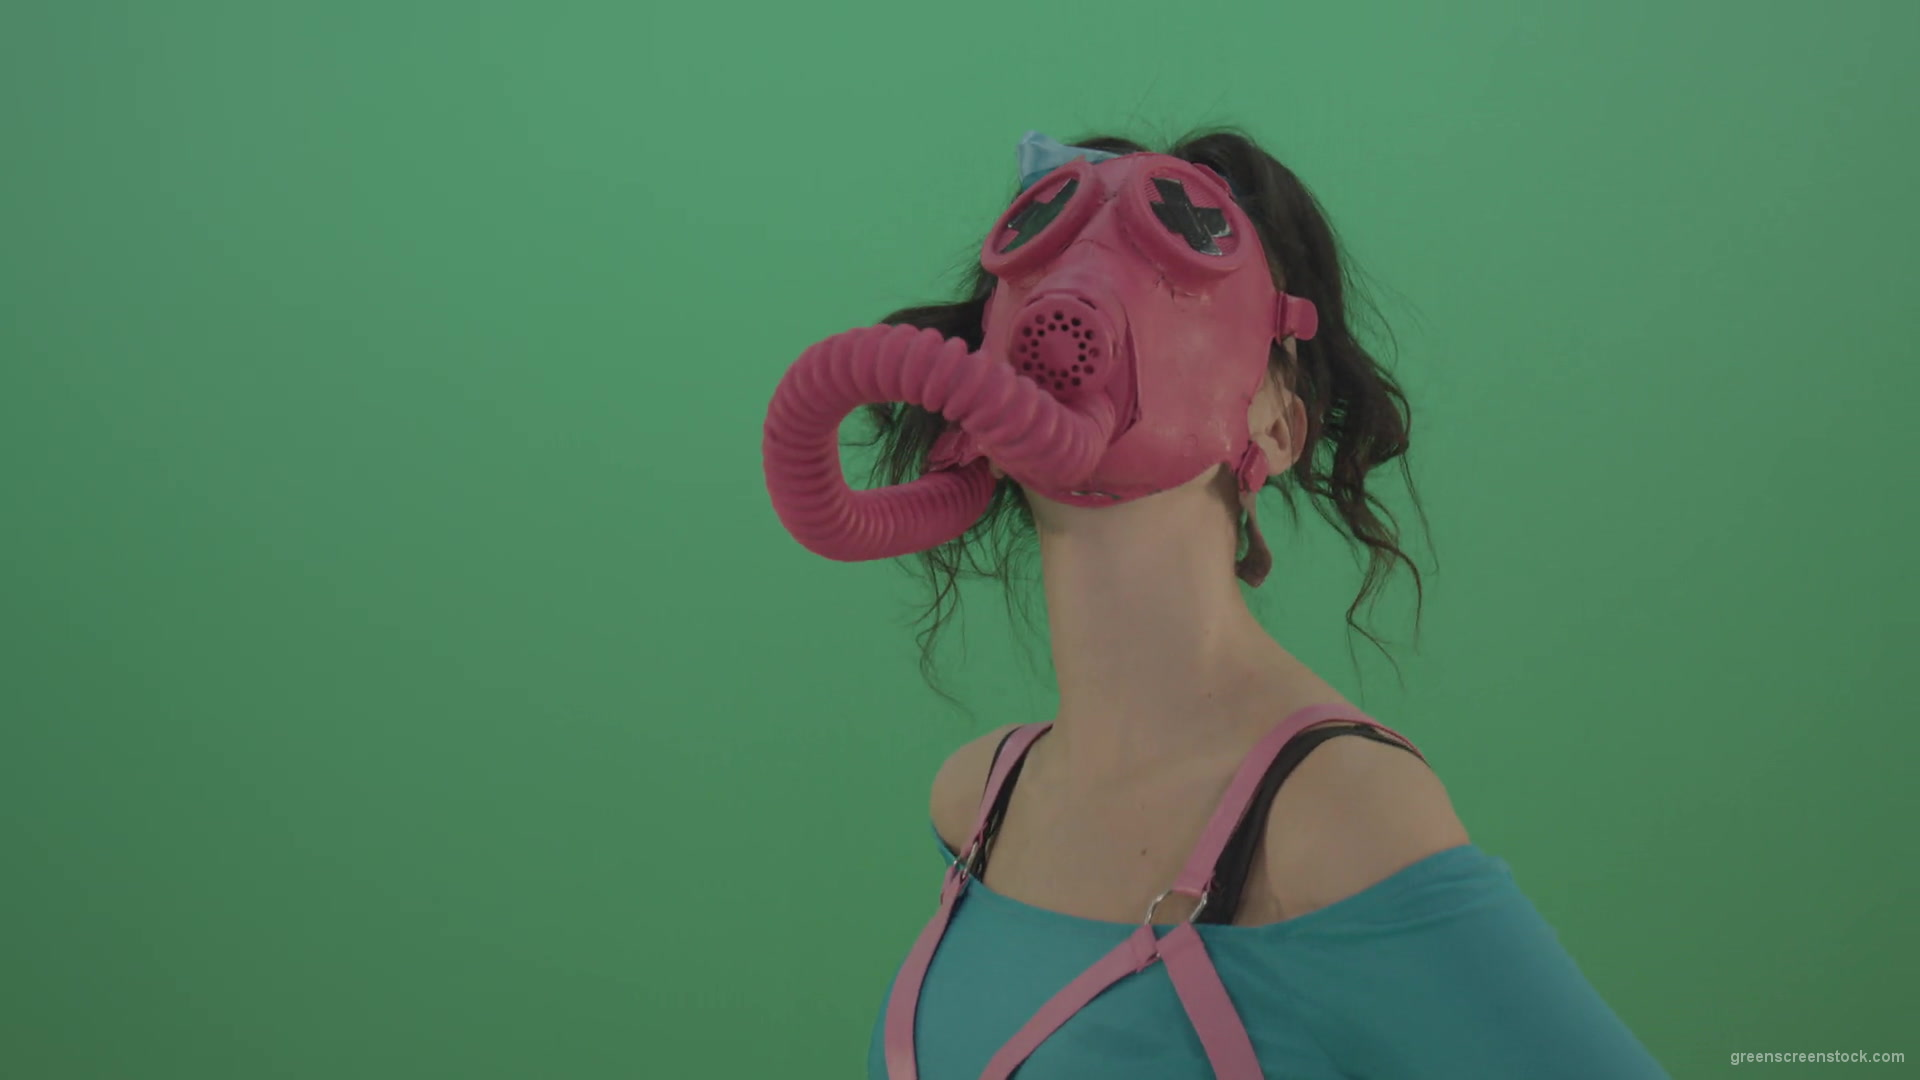 Pink-head-in-Gas-Mask-moving-Go-Go-Dance-isolated-on-green-screen-4K-Video-Footage-1920_004 Green Screen Stock